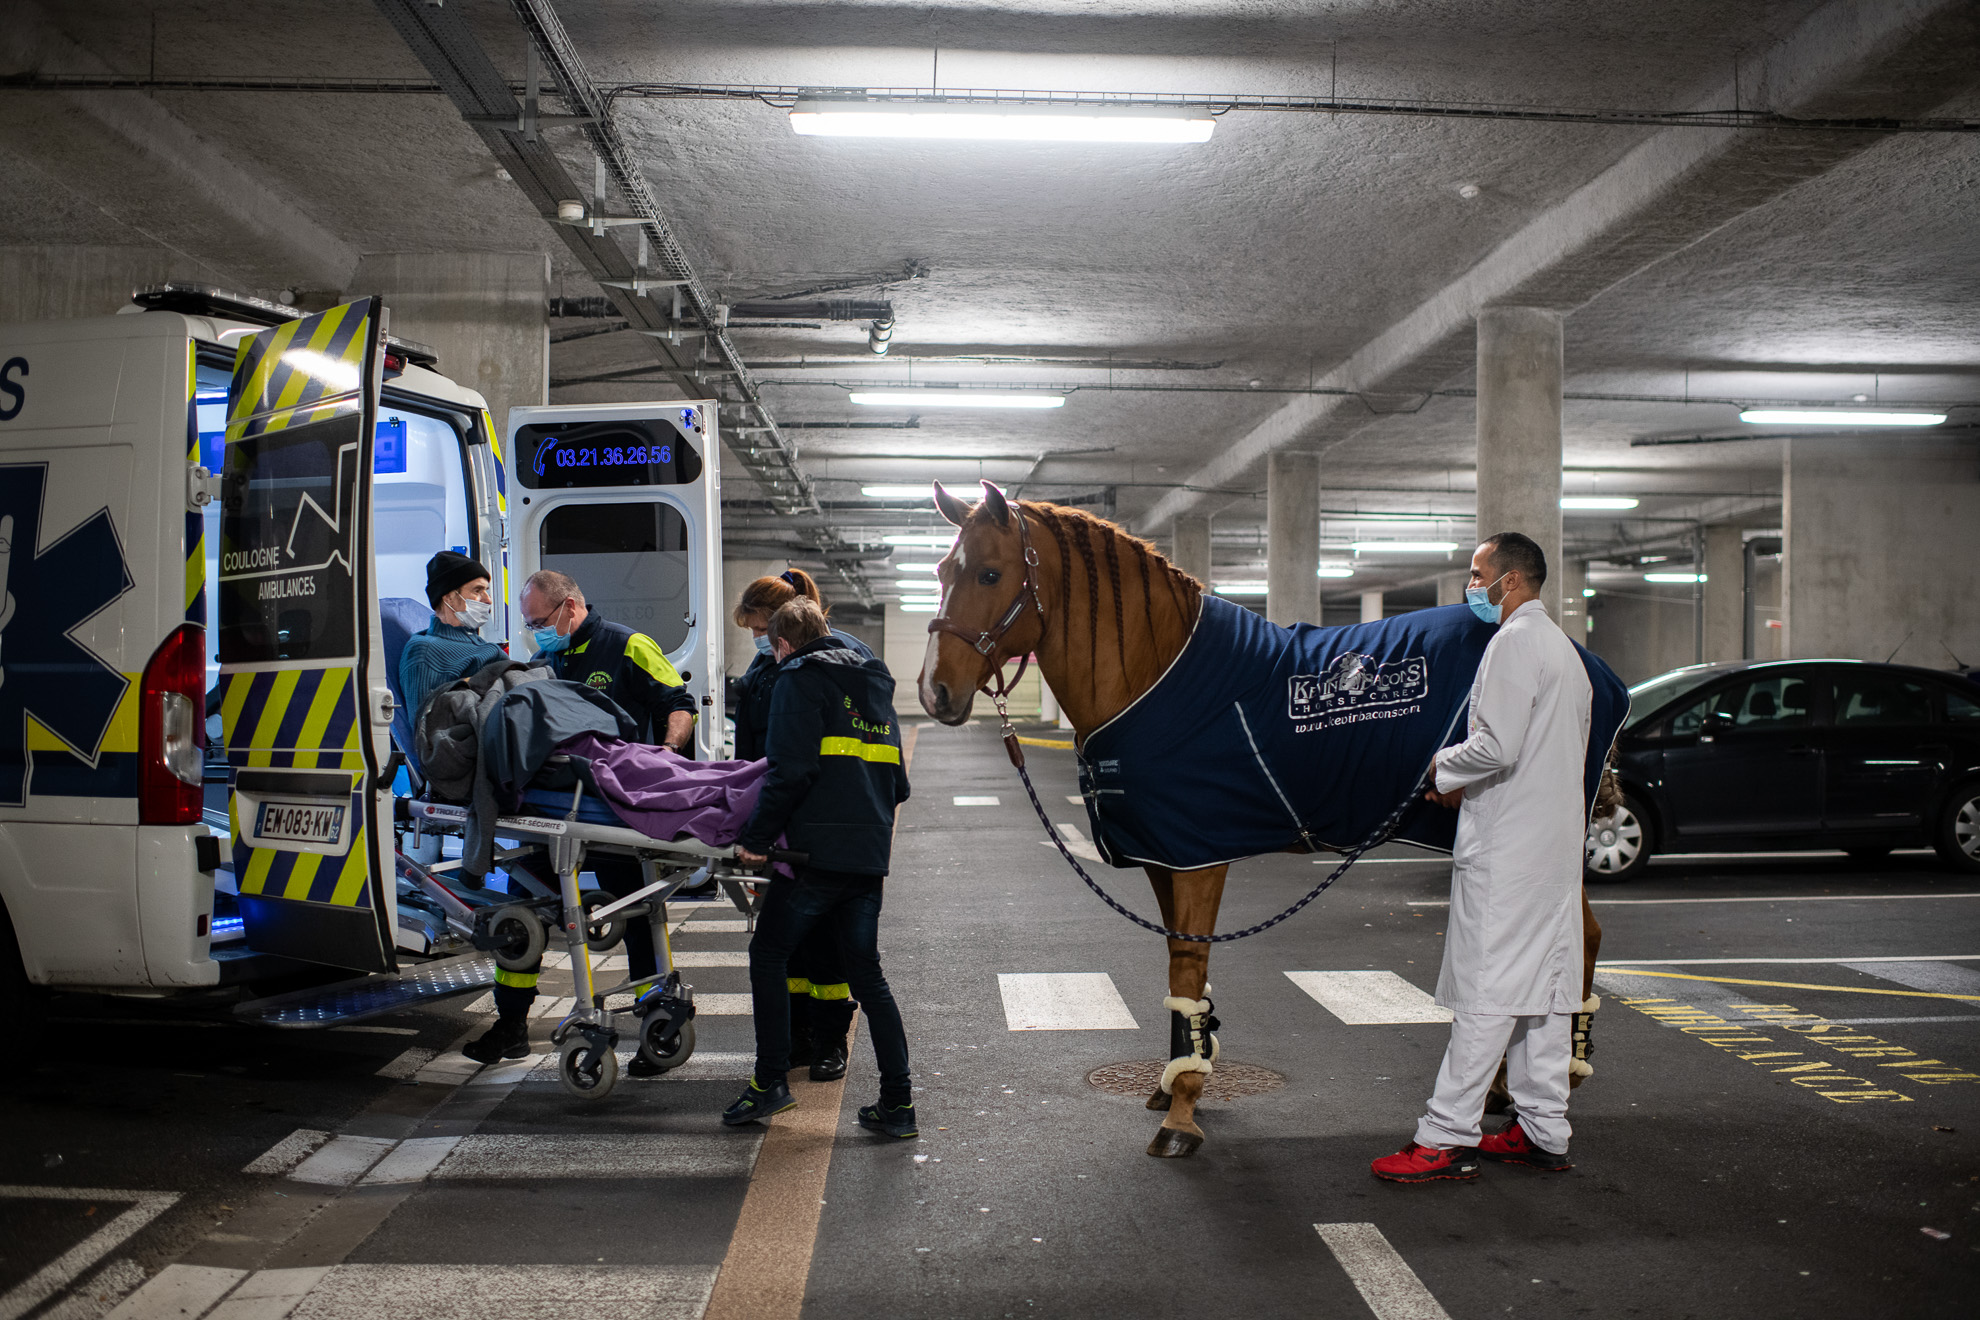 France-Calais, 12/01/2020. The Calais hospital parking garage. Peyo and Hassen accompany Roger, 64 years old, to the ambulance, which will take him back home. "Doctor Peyo and Hassen are not people, they are angels," says the son of a patient.